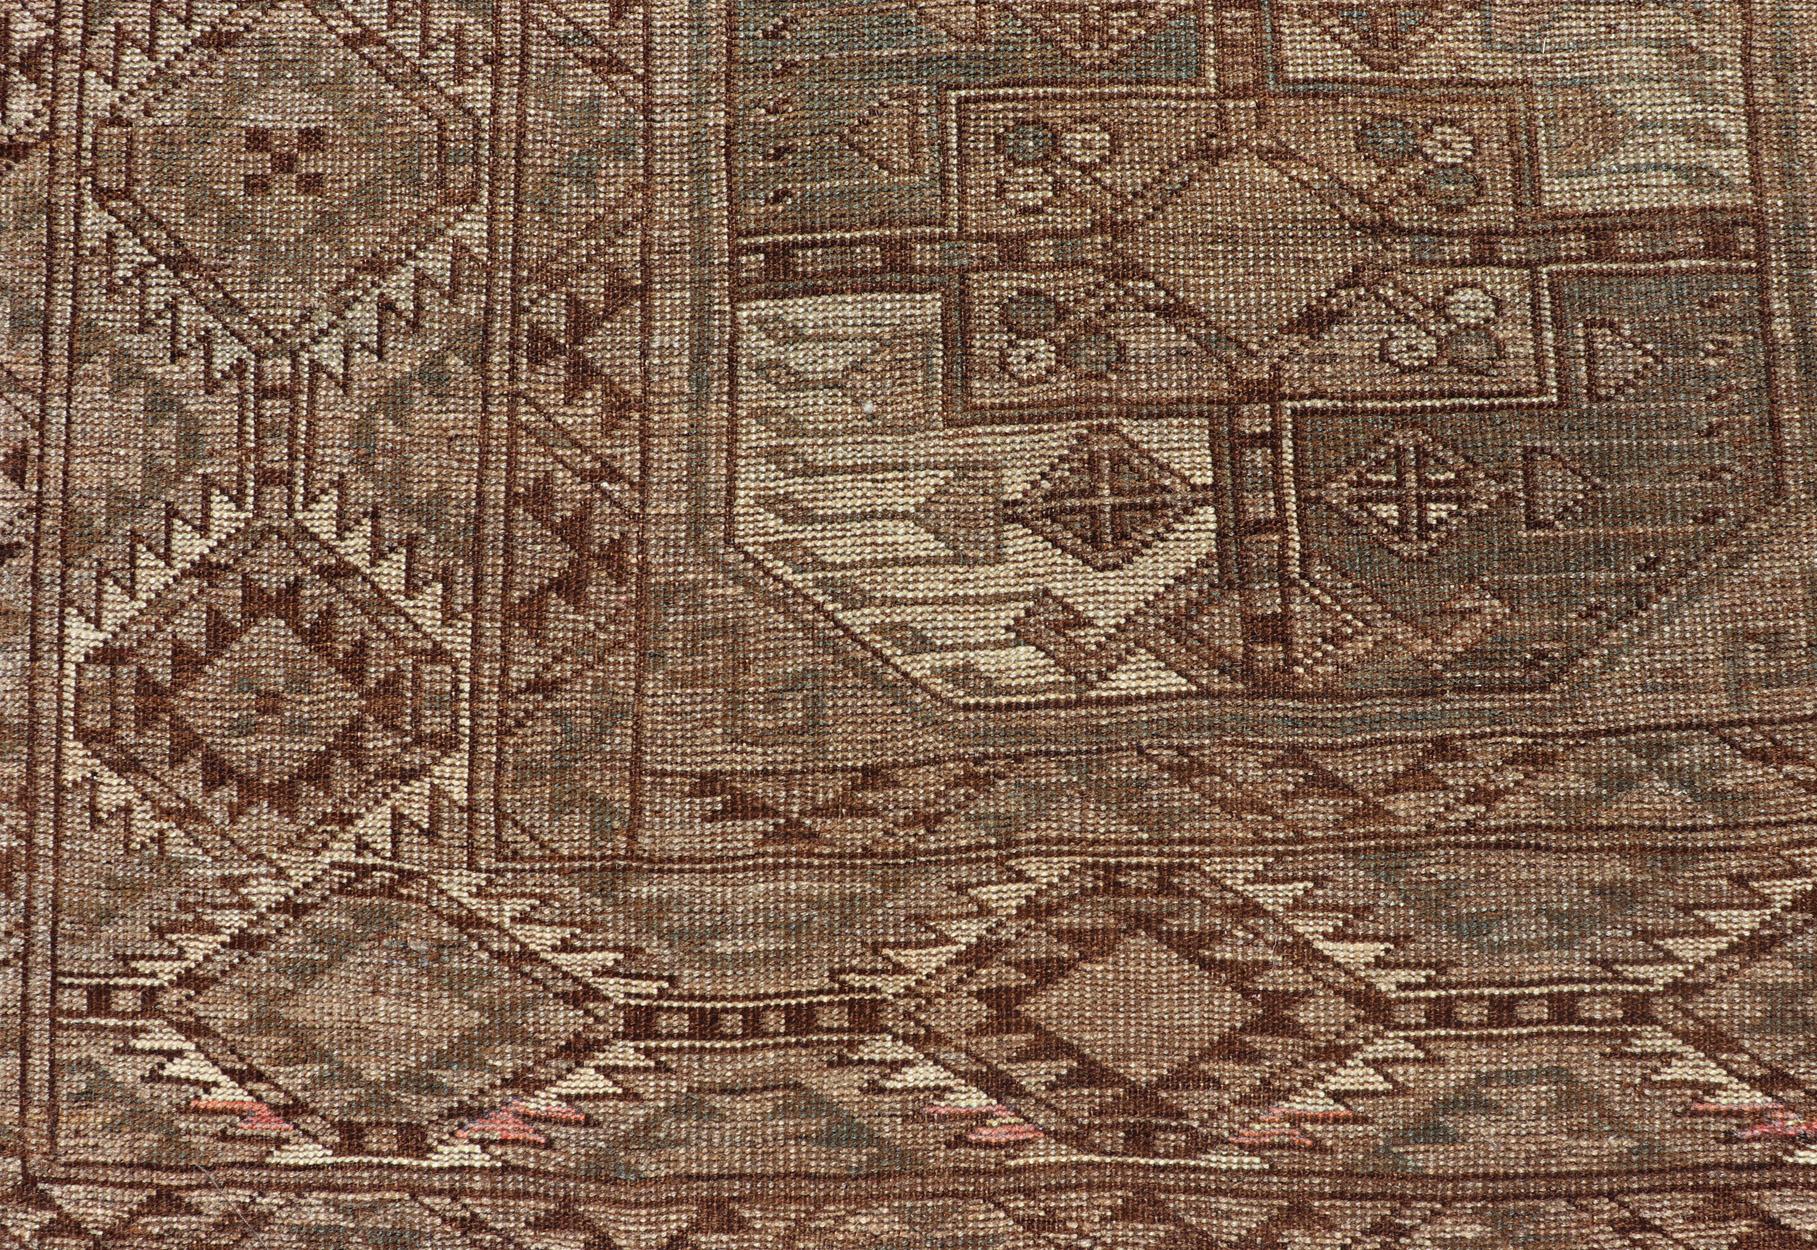 Hand-Knotted Turkomen Ersari Rug in Wool with All-Over Sub-Geometric Gul Design For Sale 5